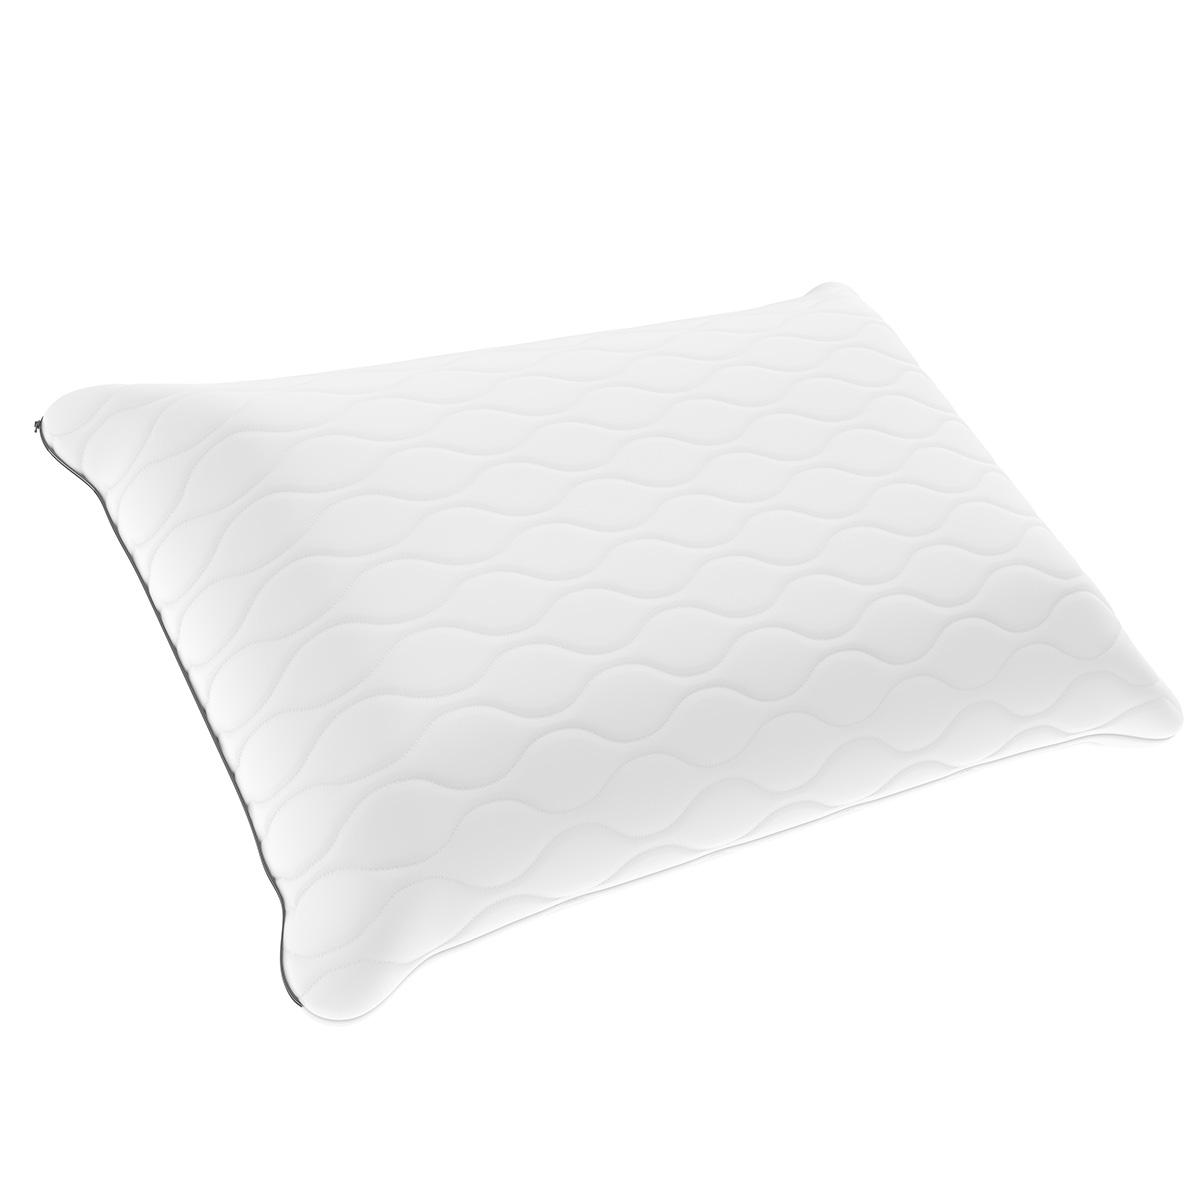 Tempur-Pedic Cloud Soft Bed Pillow for $35 Shipped